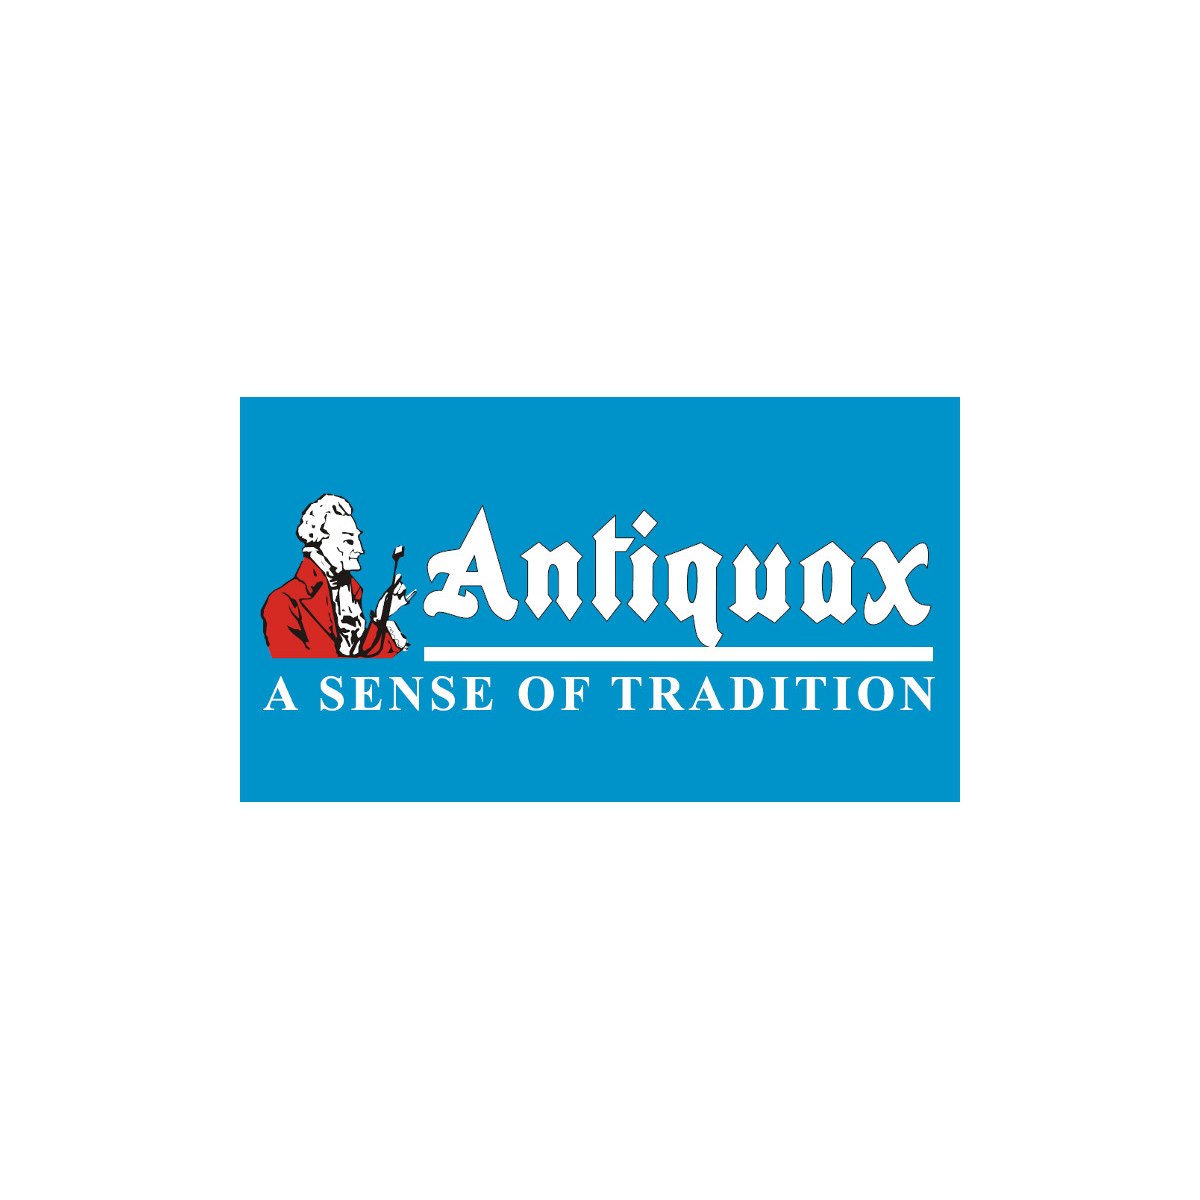 Where to buy Antiquax Products